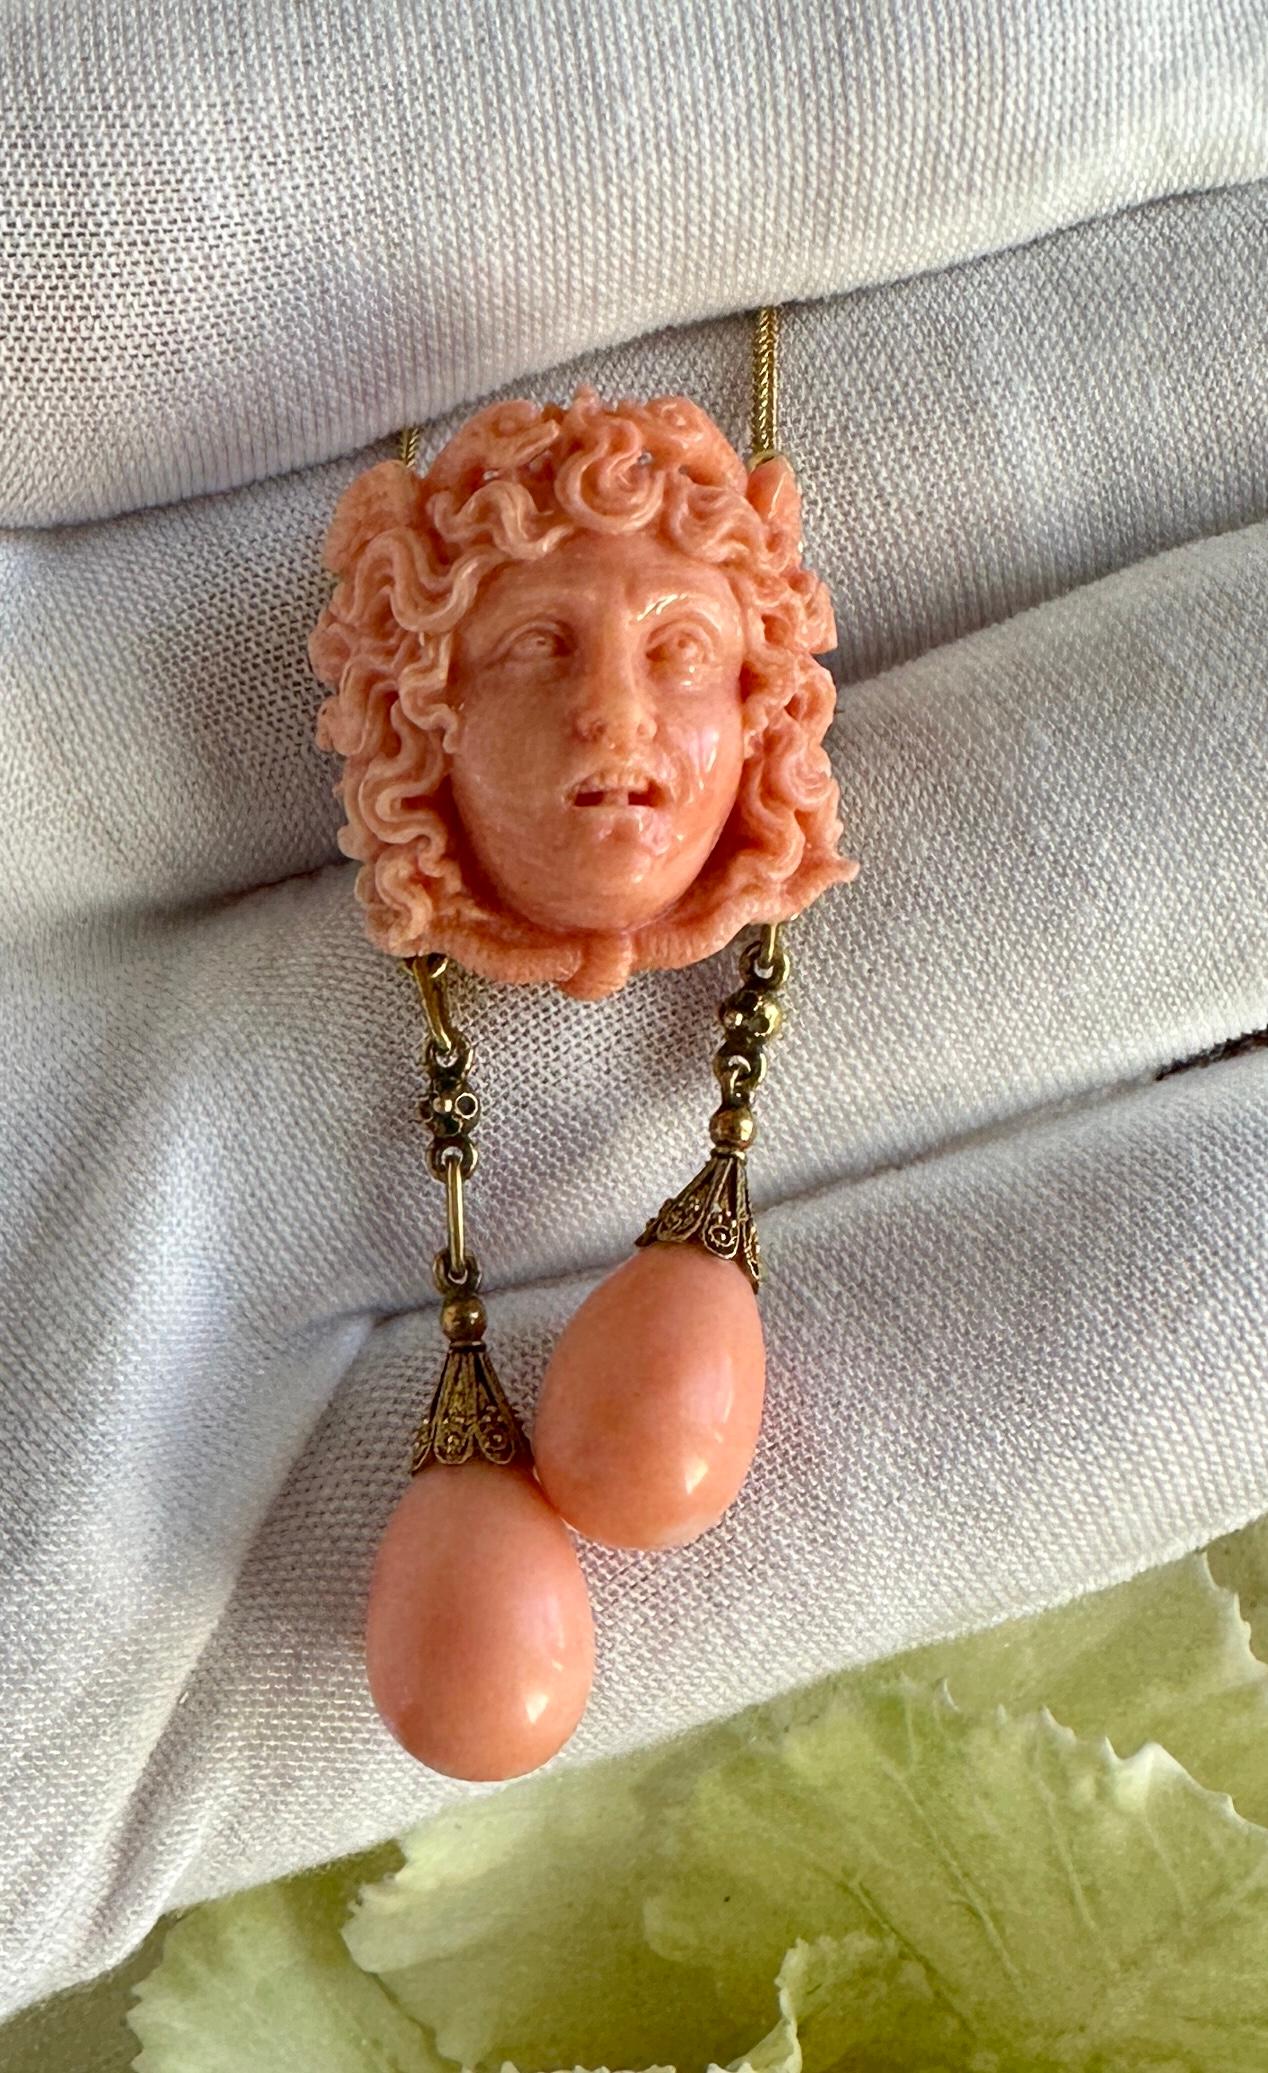 This is a Museum Quality Antique Etruscan Revival Victorian Carved Coral Necklace depicting Medusa with a Crown of Snakes with two pear shape coral drop pendants.  The Coral Medusa is set in 14-18 Karat Gold with extraordinary Etruscan Revival